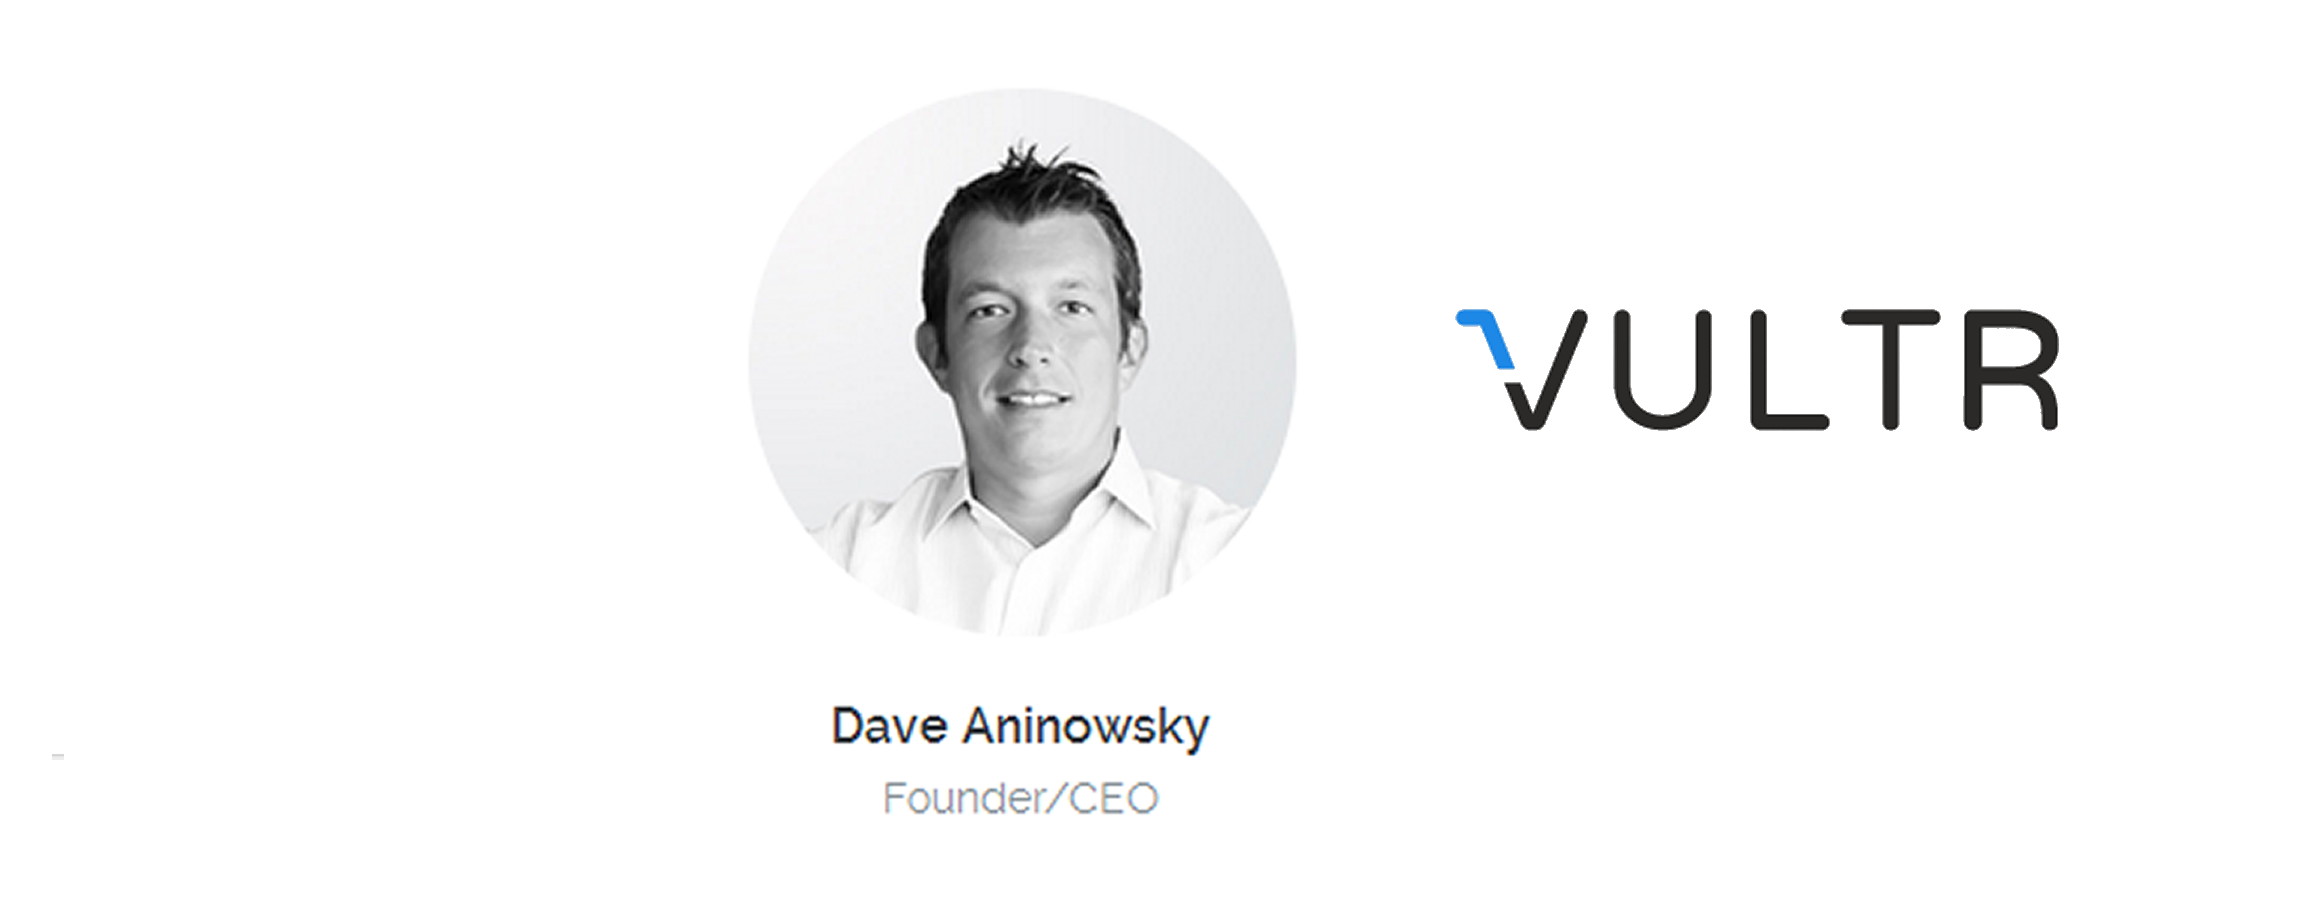 Vultr - Dave Aninowsky, CEO